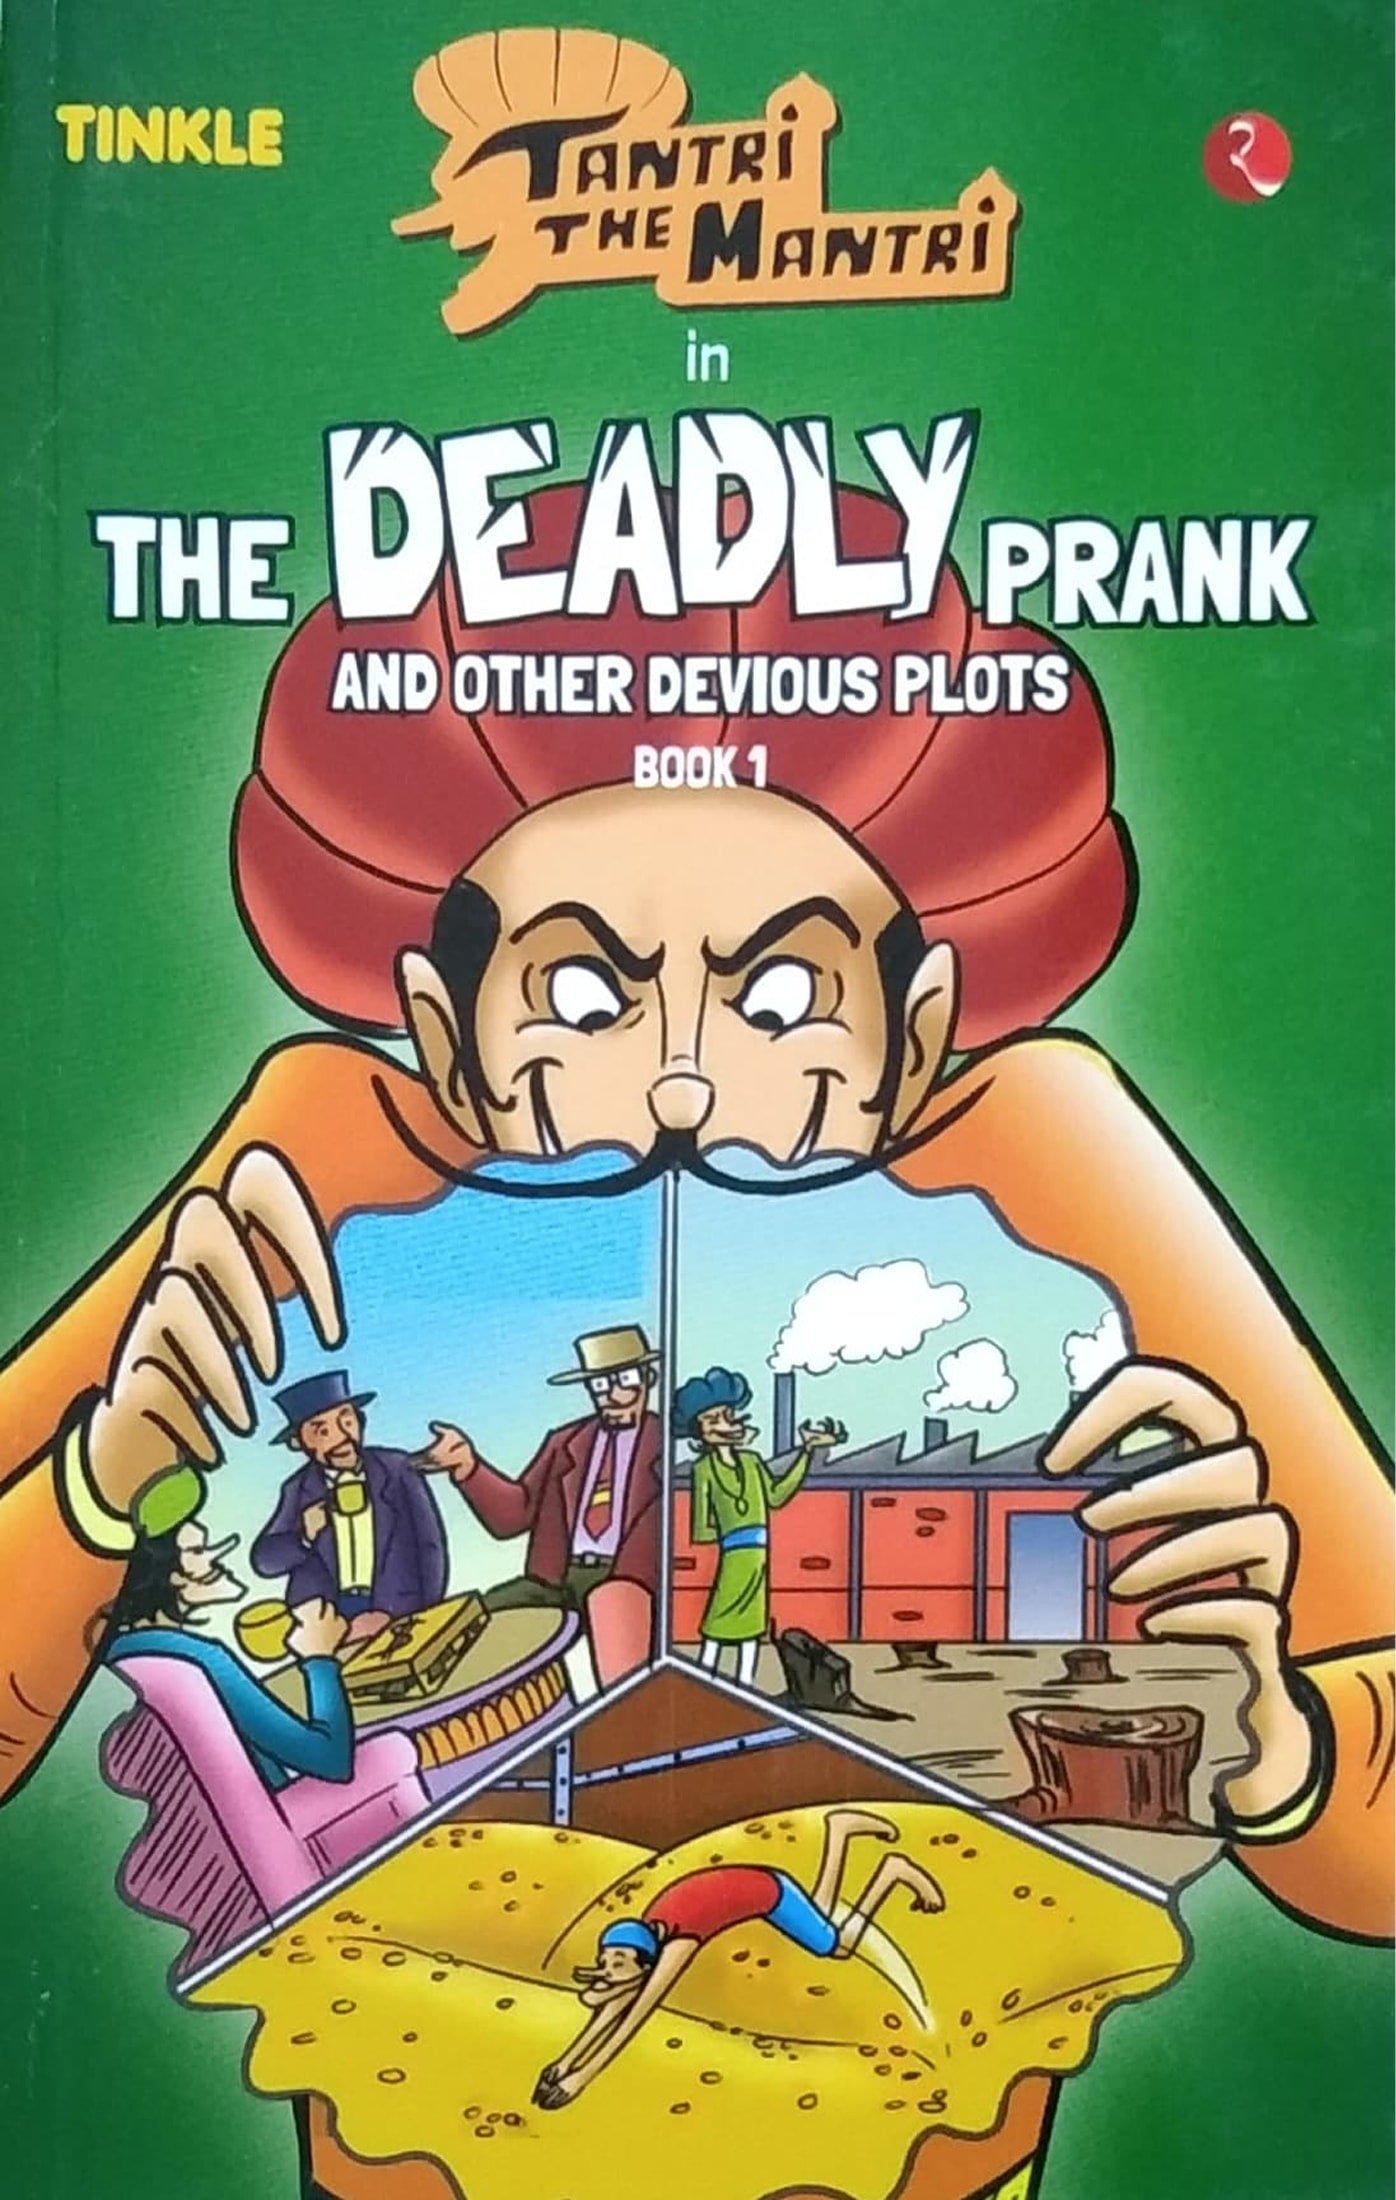 The Deadly Prank